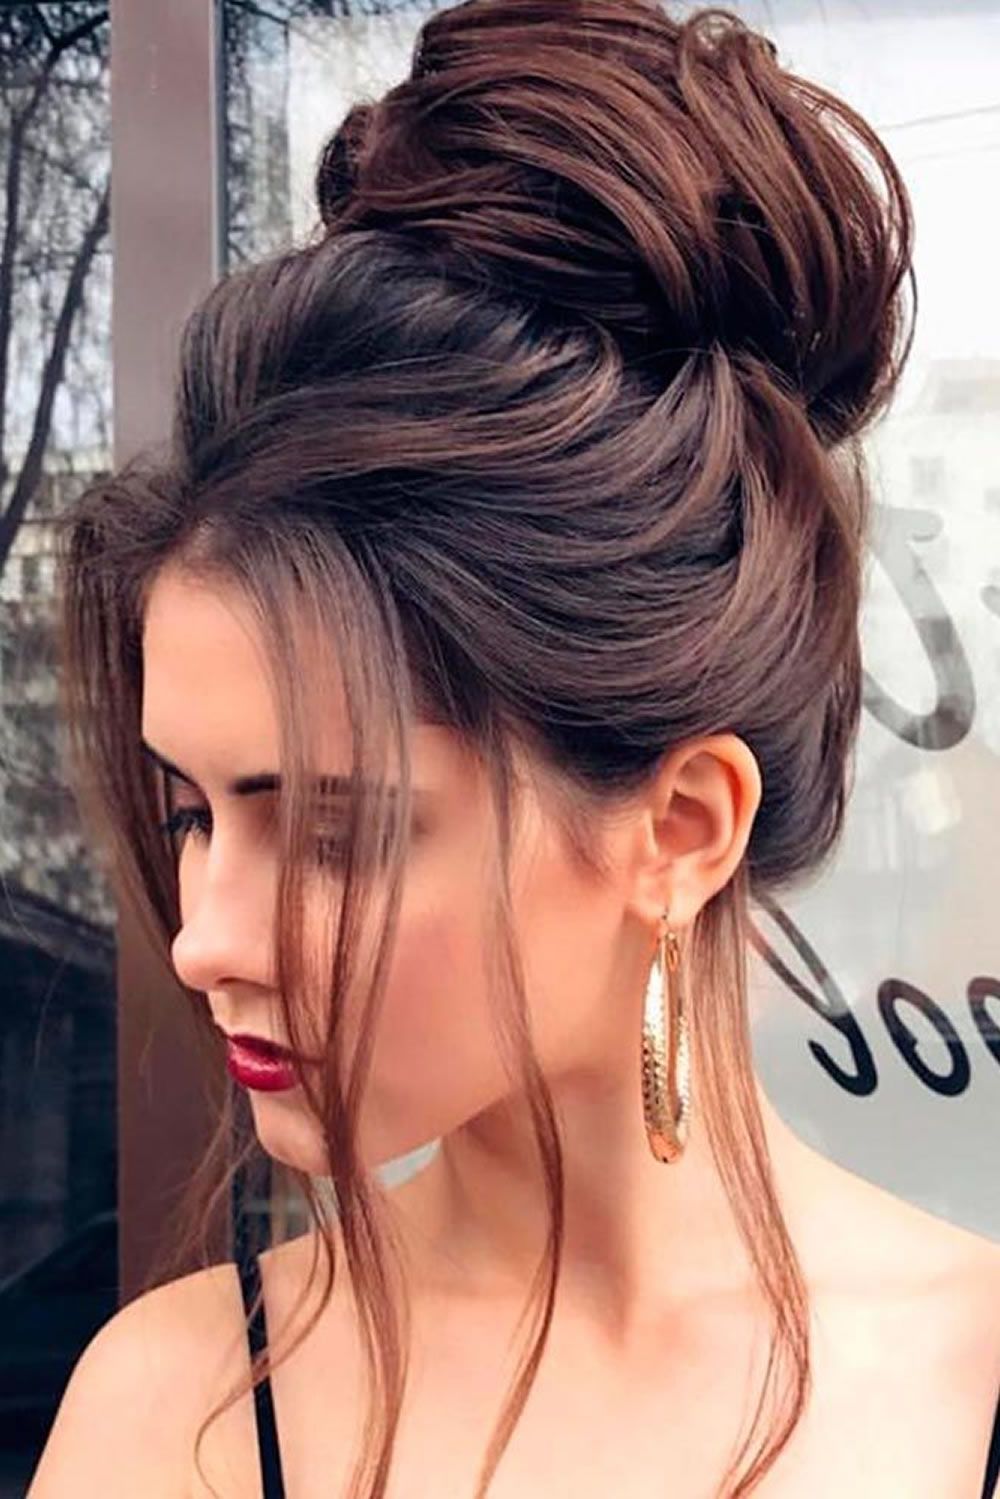 Christmas Party Hairstyles For 2018 & Long, Medium Or Short Hair Inside Short Hairstyles For Christmas Party (View 10 of 25)